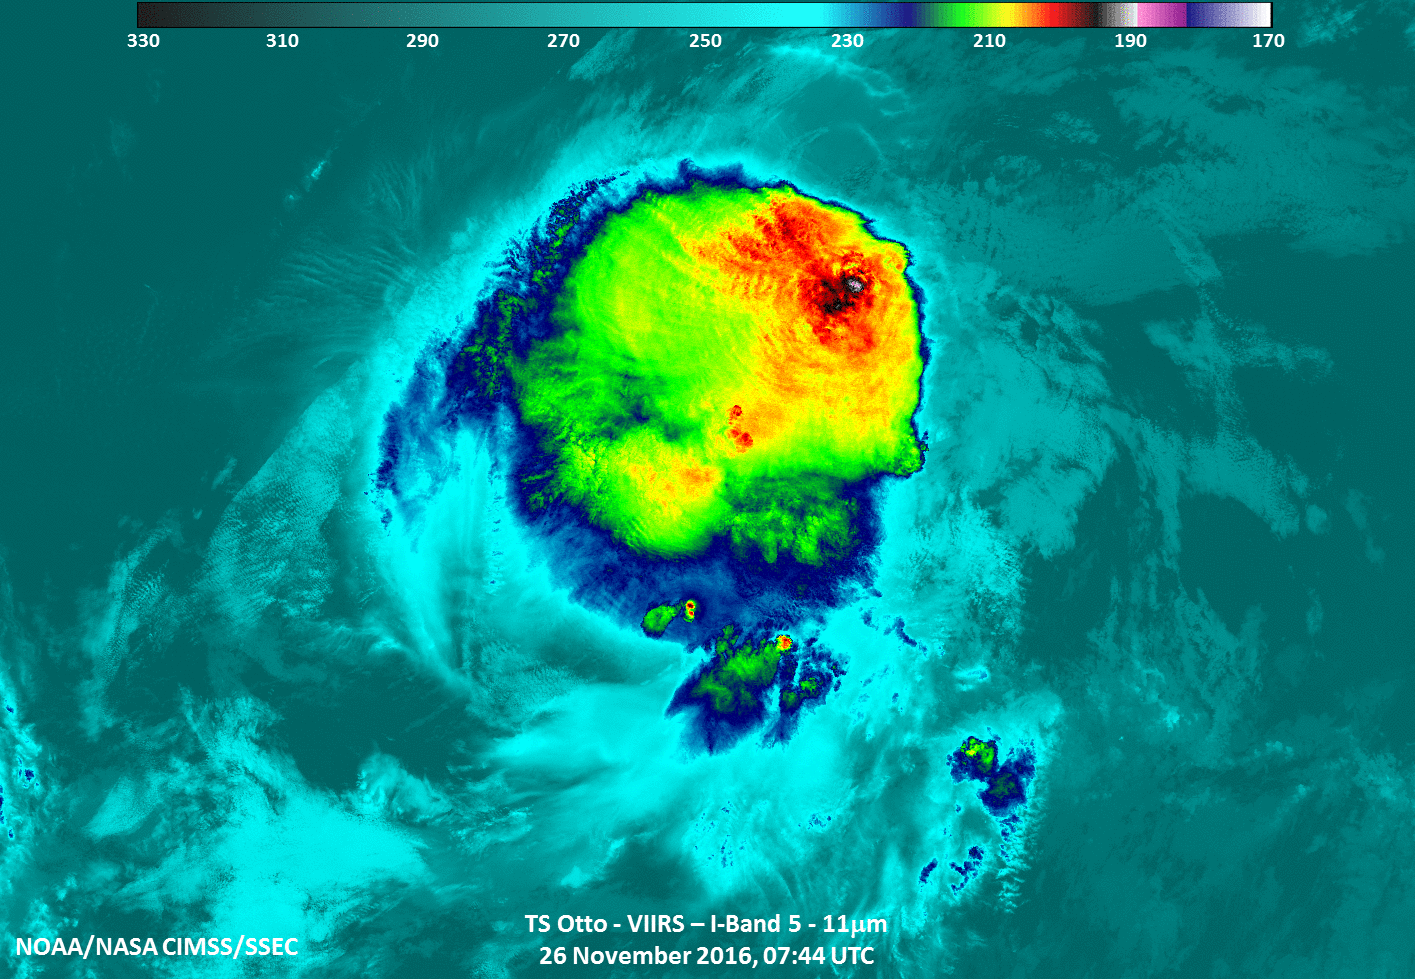 Suomi NPP VIIRS Infrared Window (11.45 µm) and Day/Night Band (0.7 µm) images [click to enlarge]